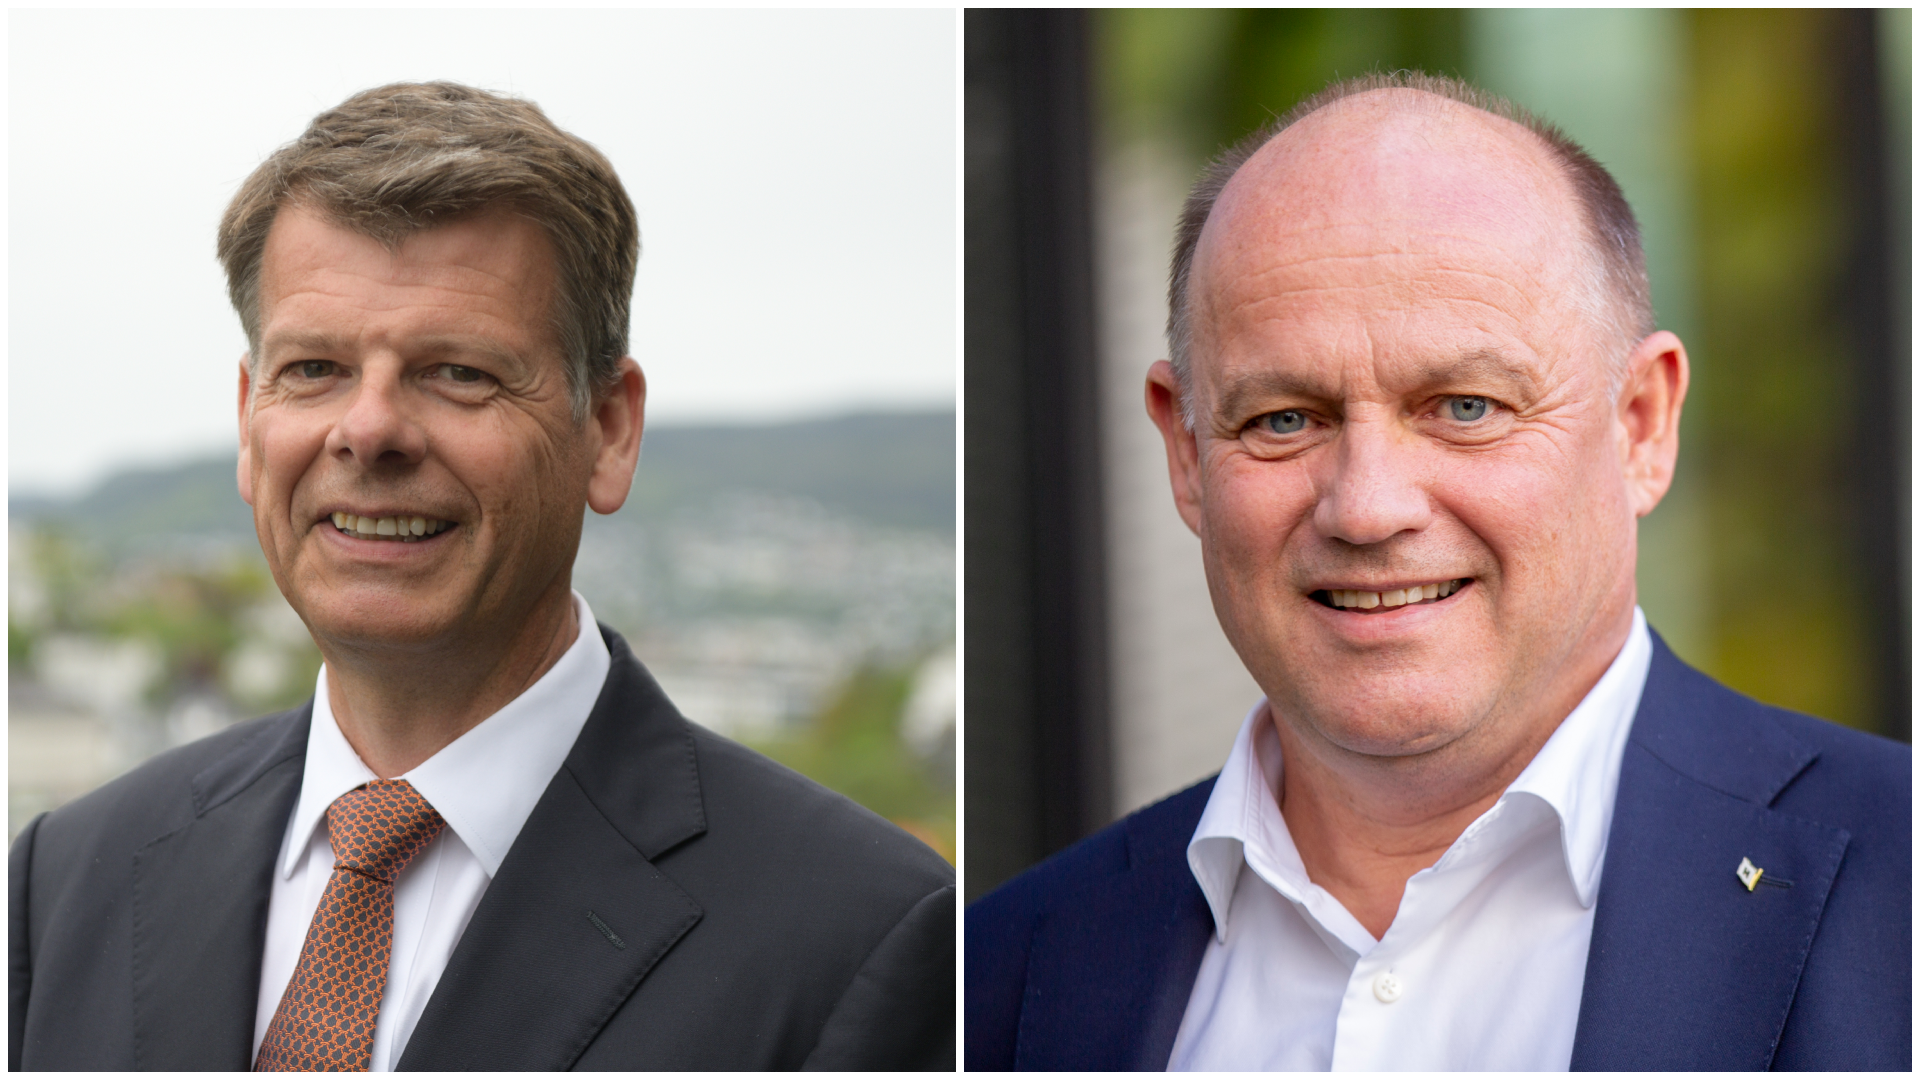 Harald Fotland was elected as President and Andreas Enger as Vice President of the Norwegian Shipowners' Association for the next two years. | Photo: Gunnar Eide / Odfjell og Javad Parsa